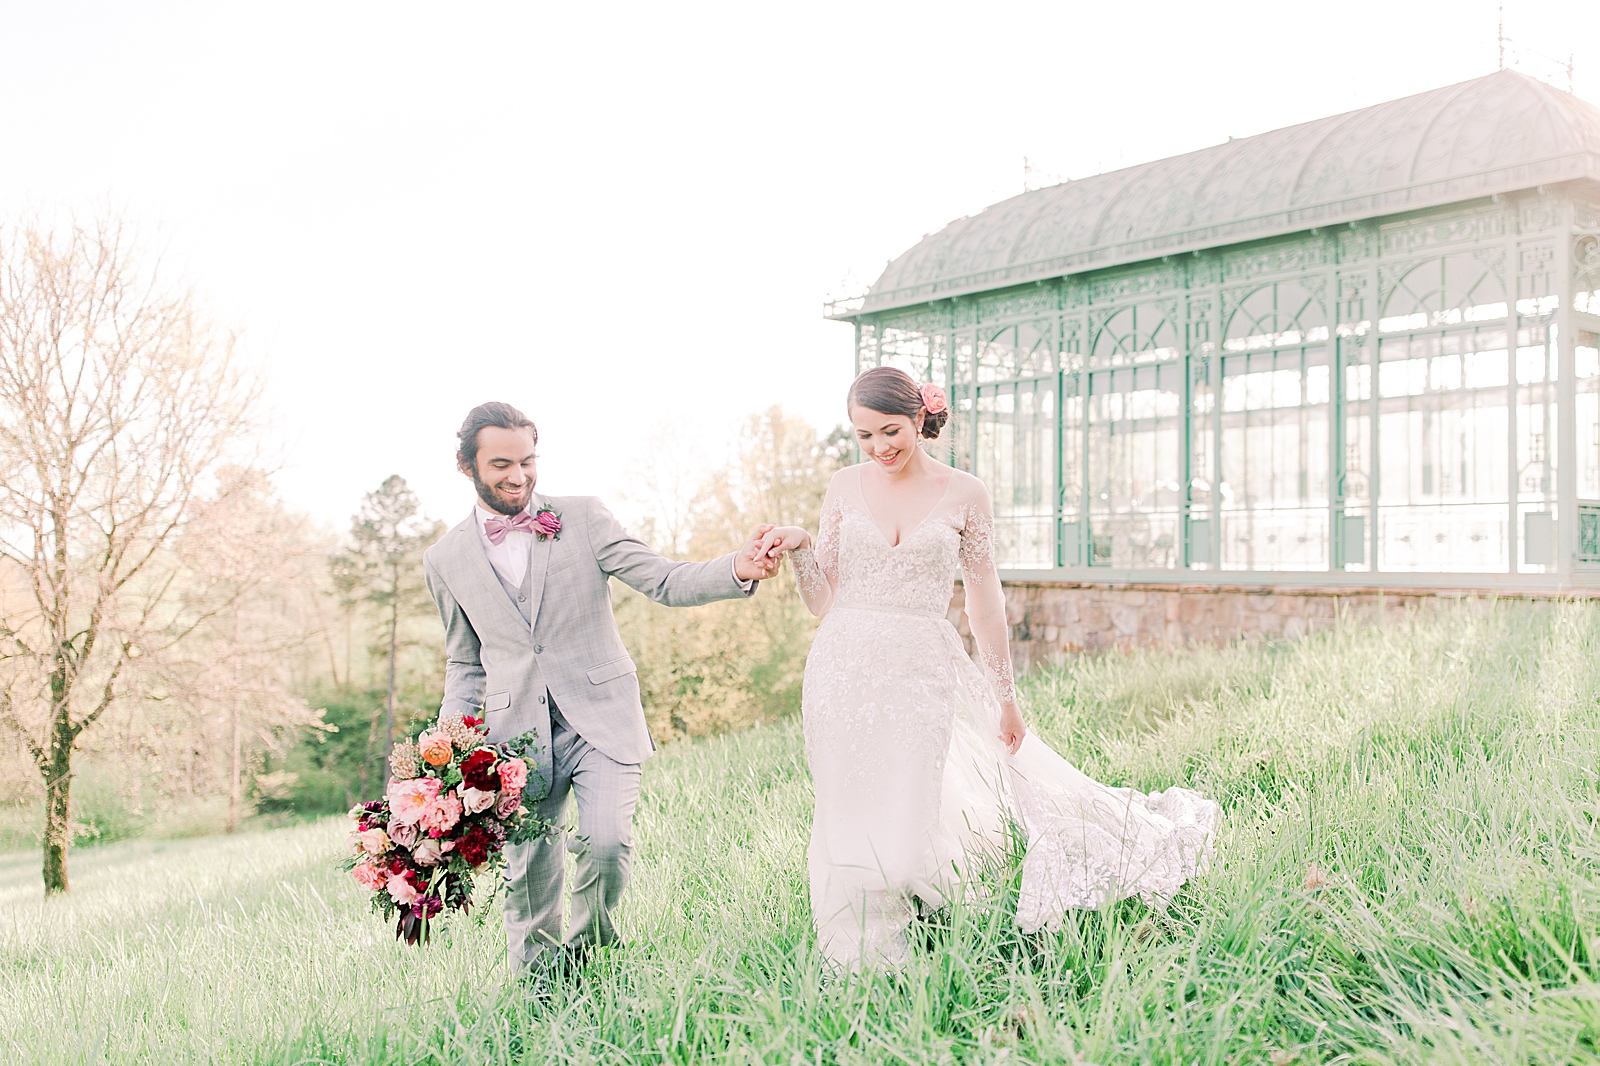 2400 On The River Wedding Bride and Groom walking through grass holding hands in front of Greenhouse Photo